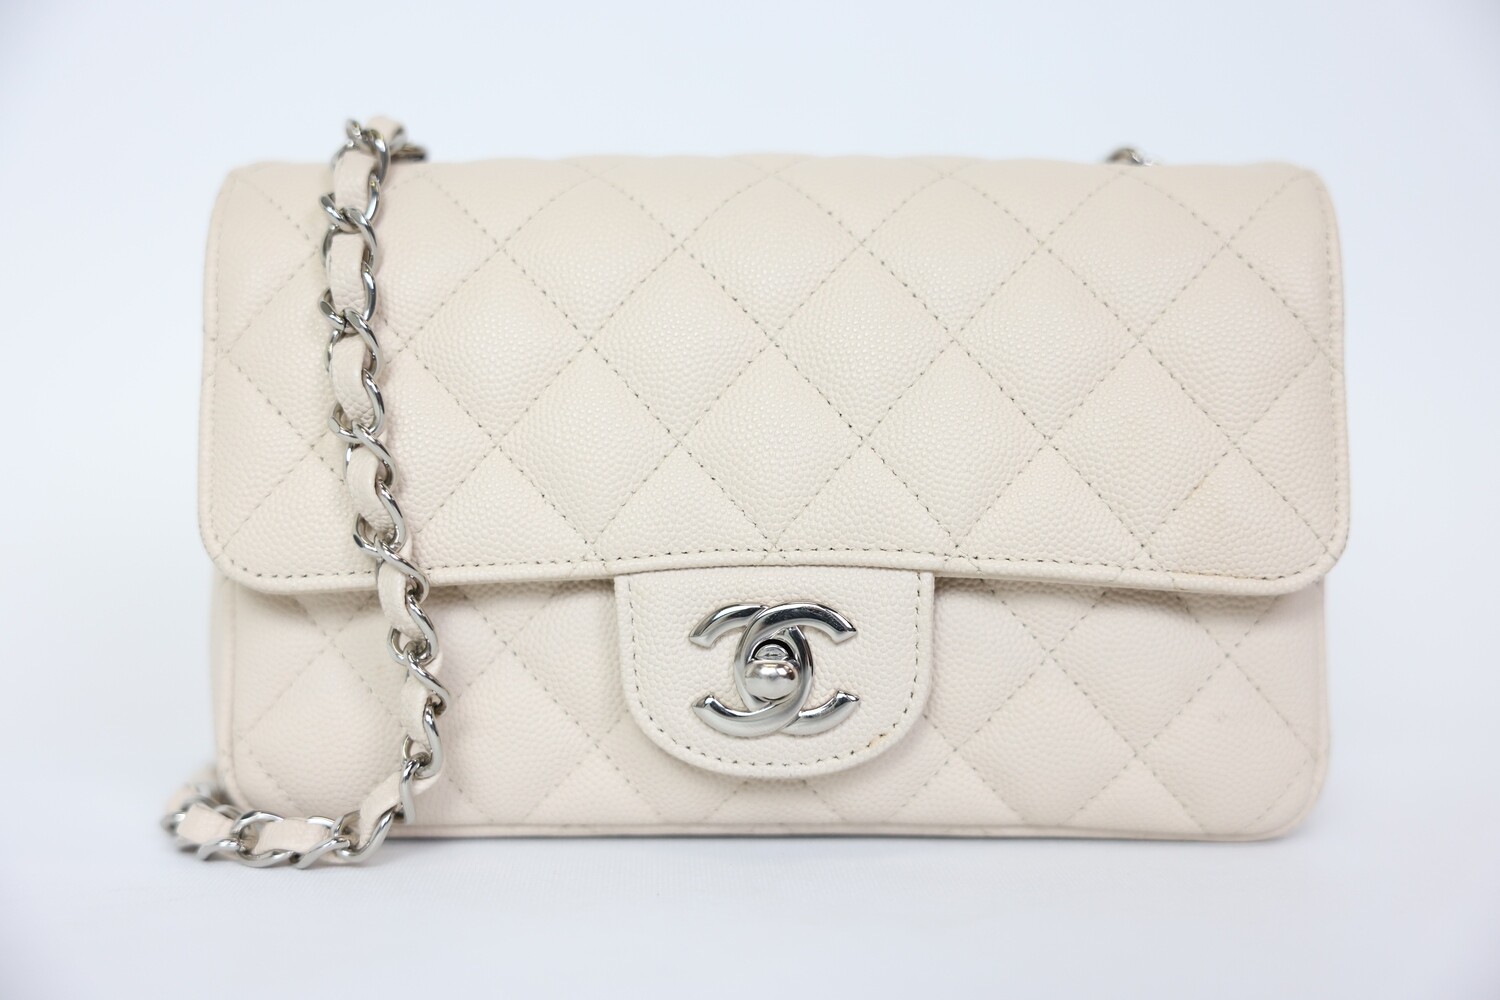 Chanel Classic Mini Rectangular, Light Beige Cavair Leather With Silver Hardware, Preowned In Dustbag WA001